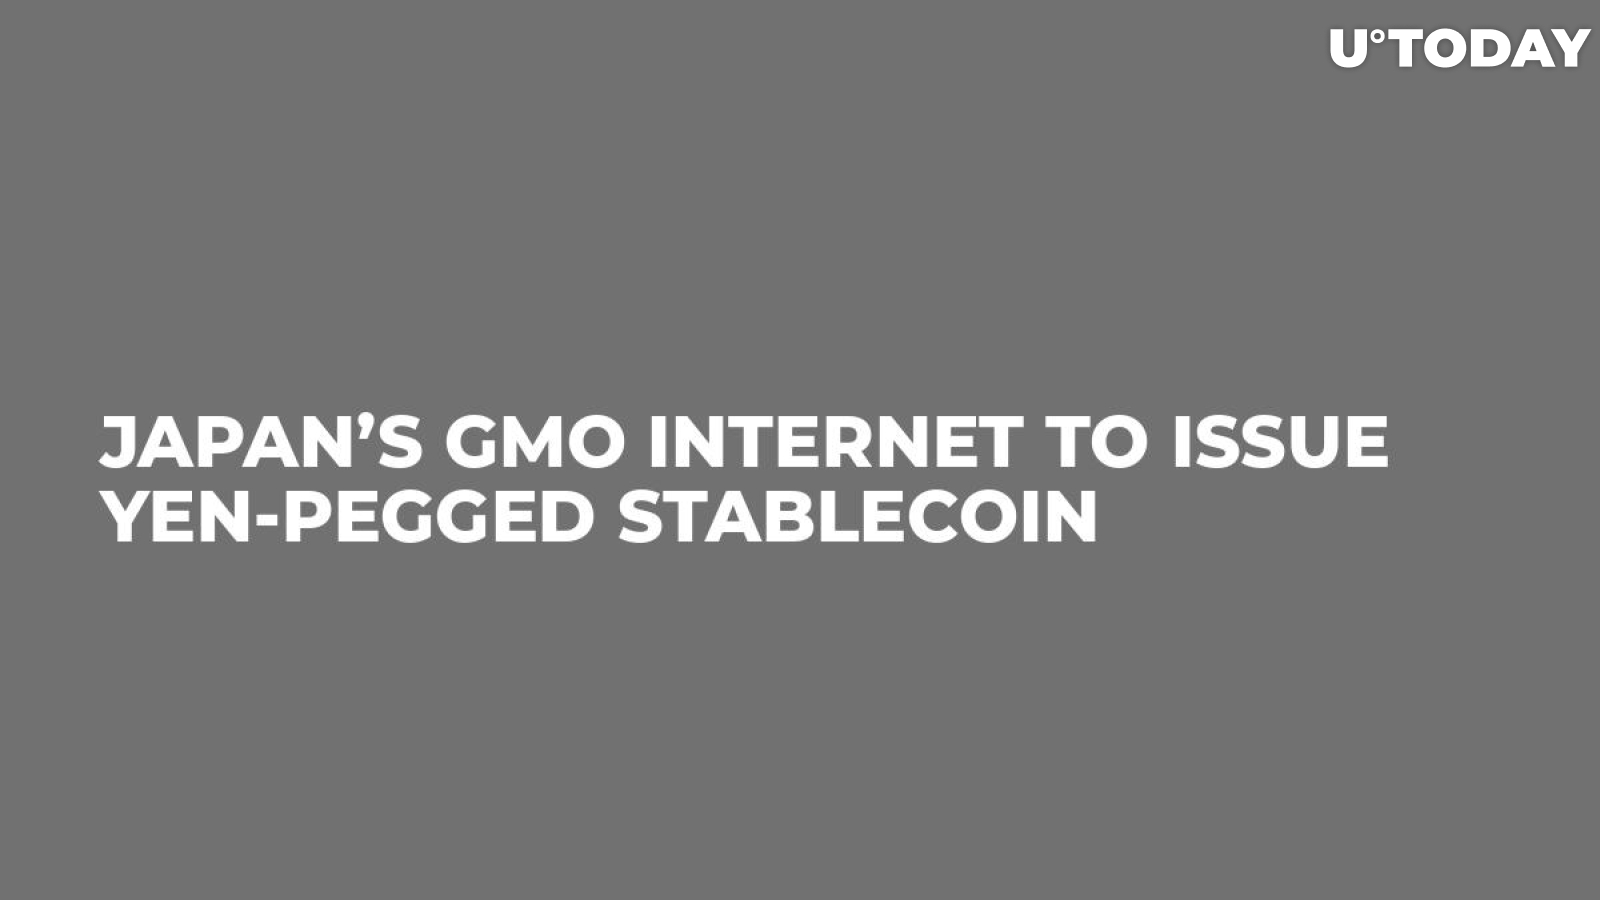 Japan’s GMO Internet To Issue Yen-Pegged Stablecoin